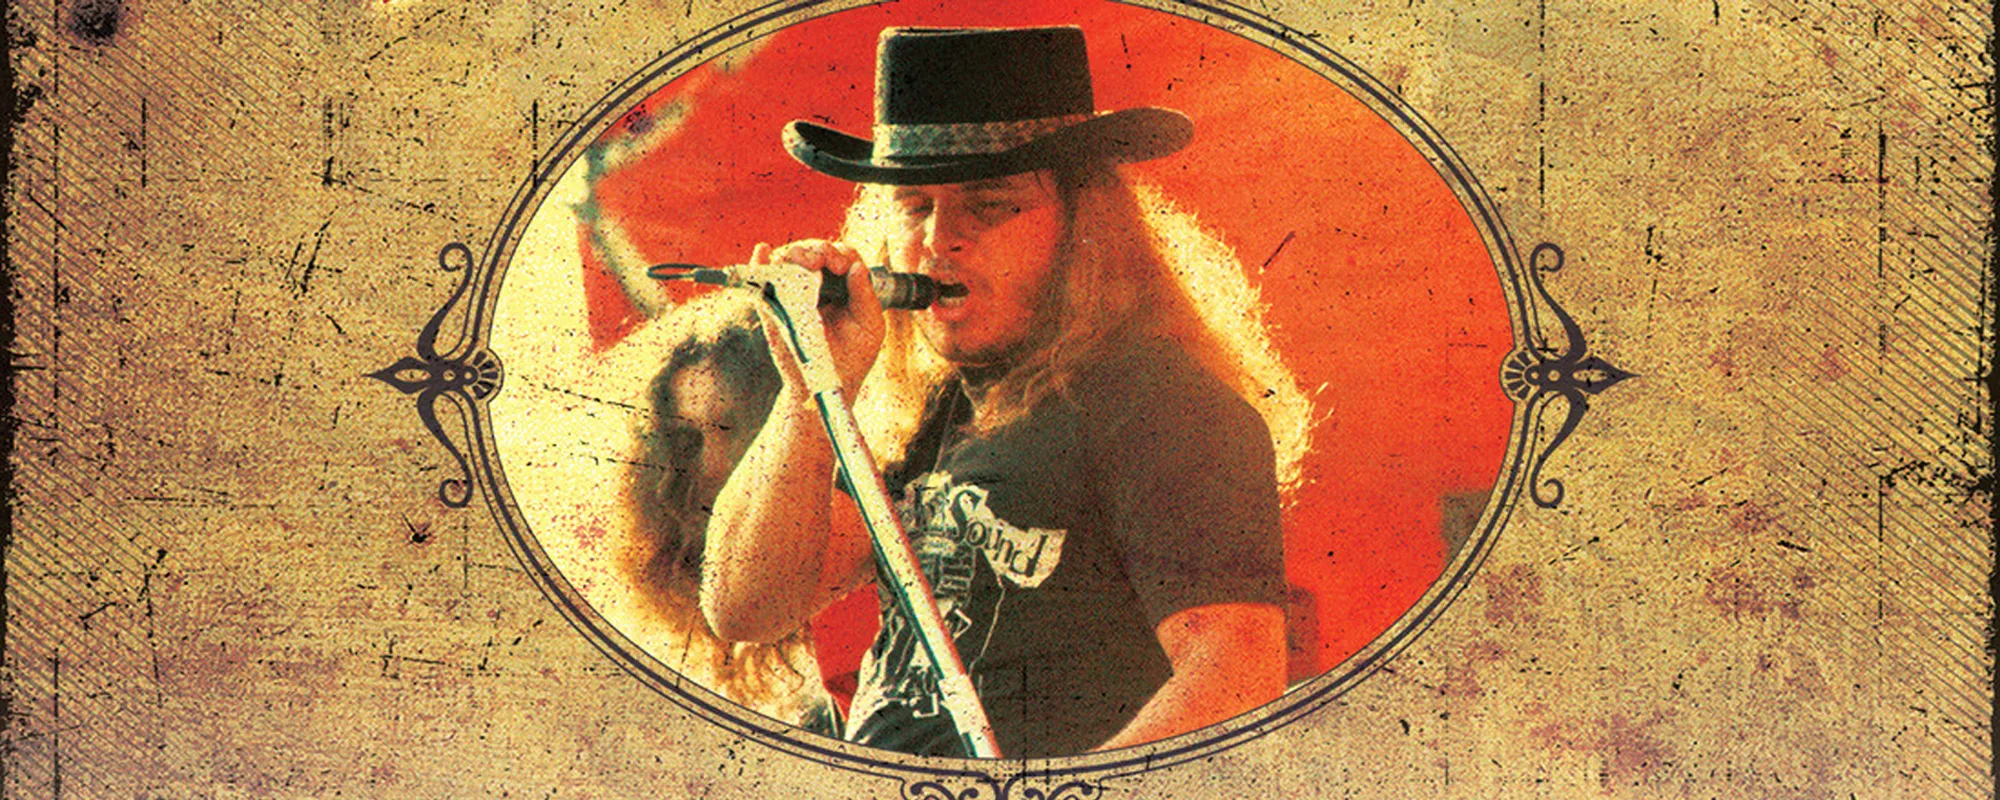 Review: Skynyrd Still Soars Courtesy of a New Live CD/DVD